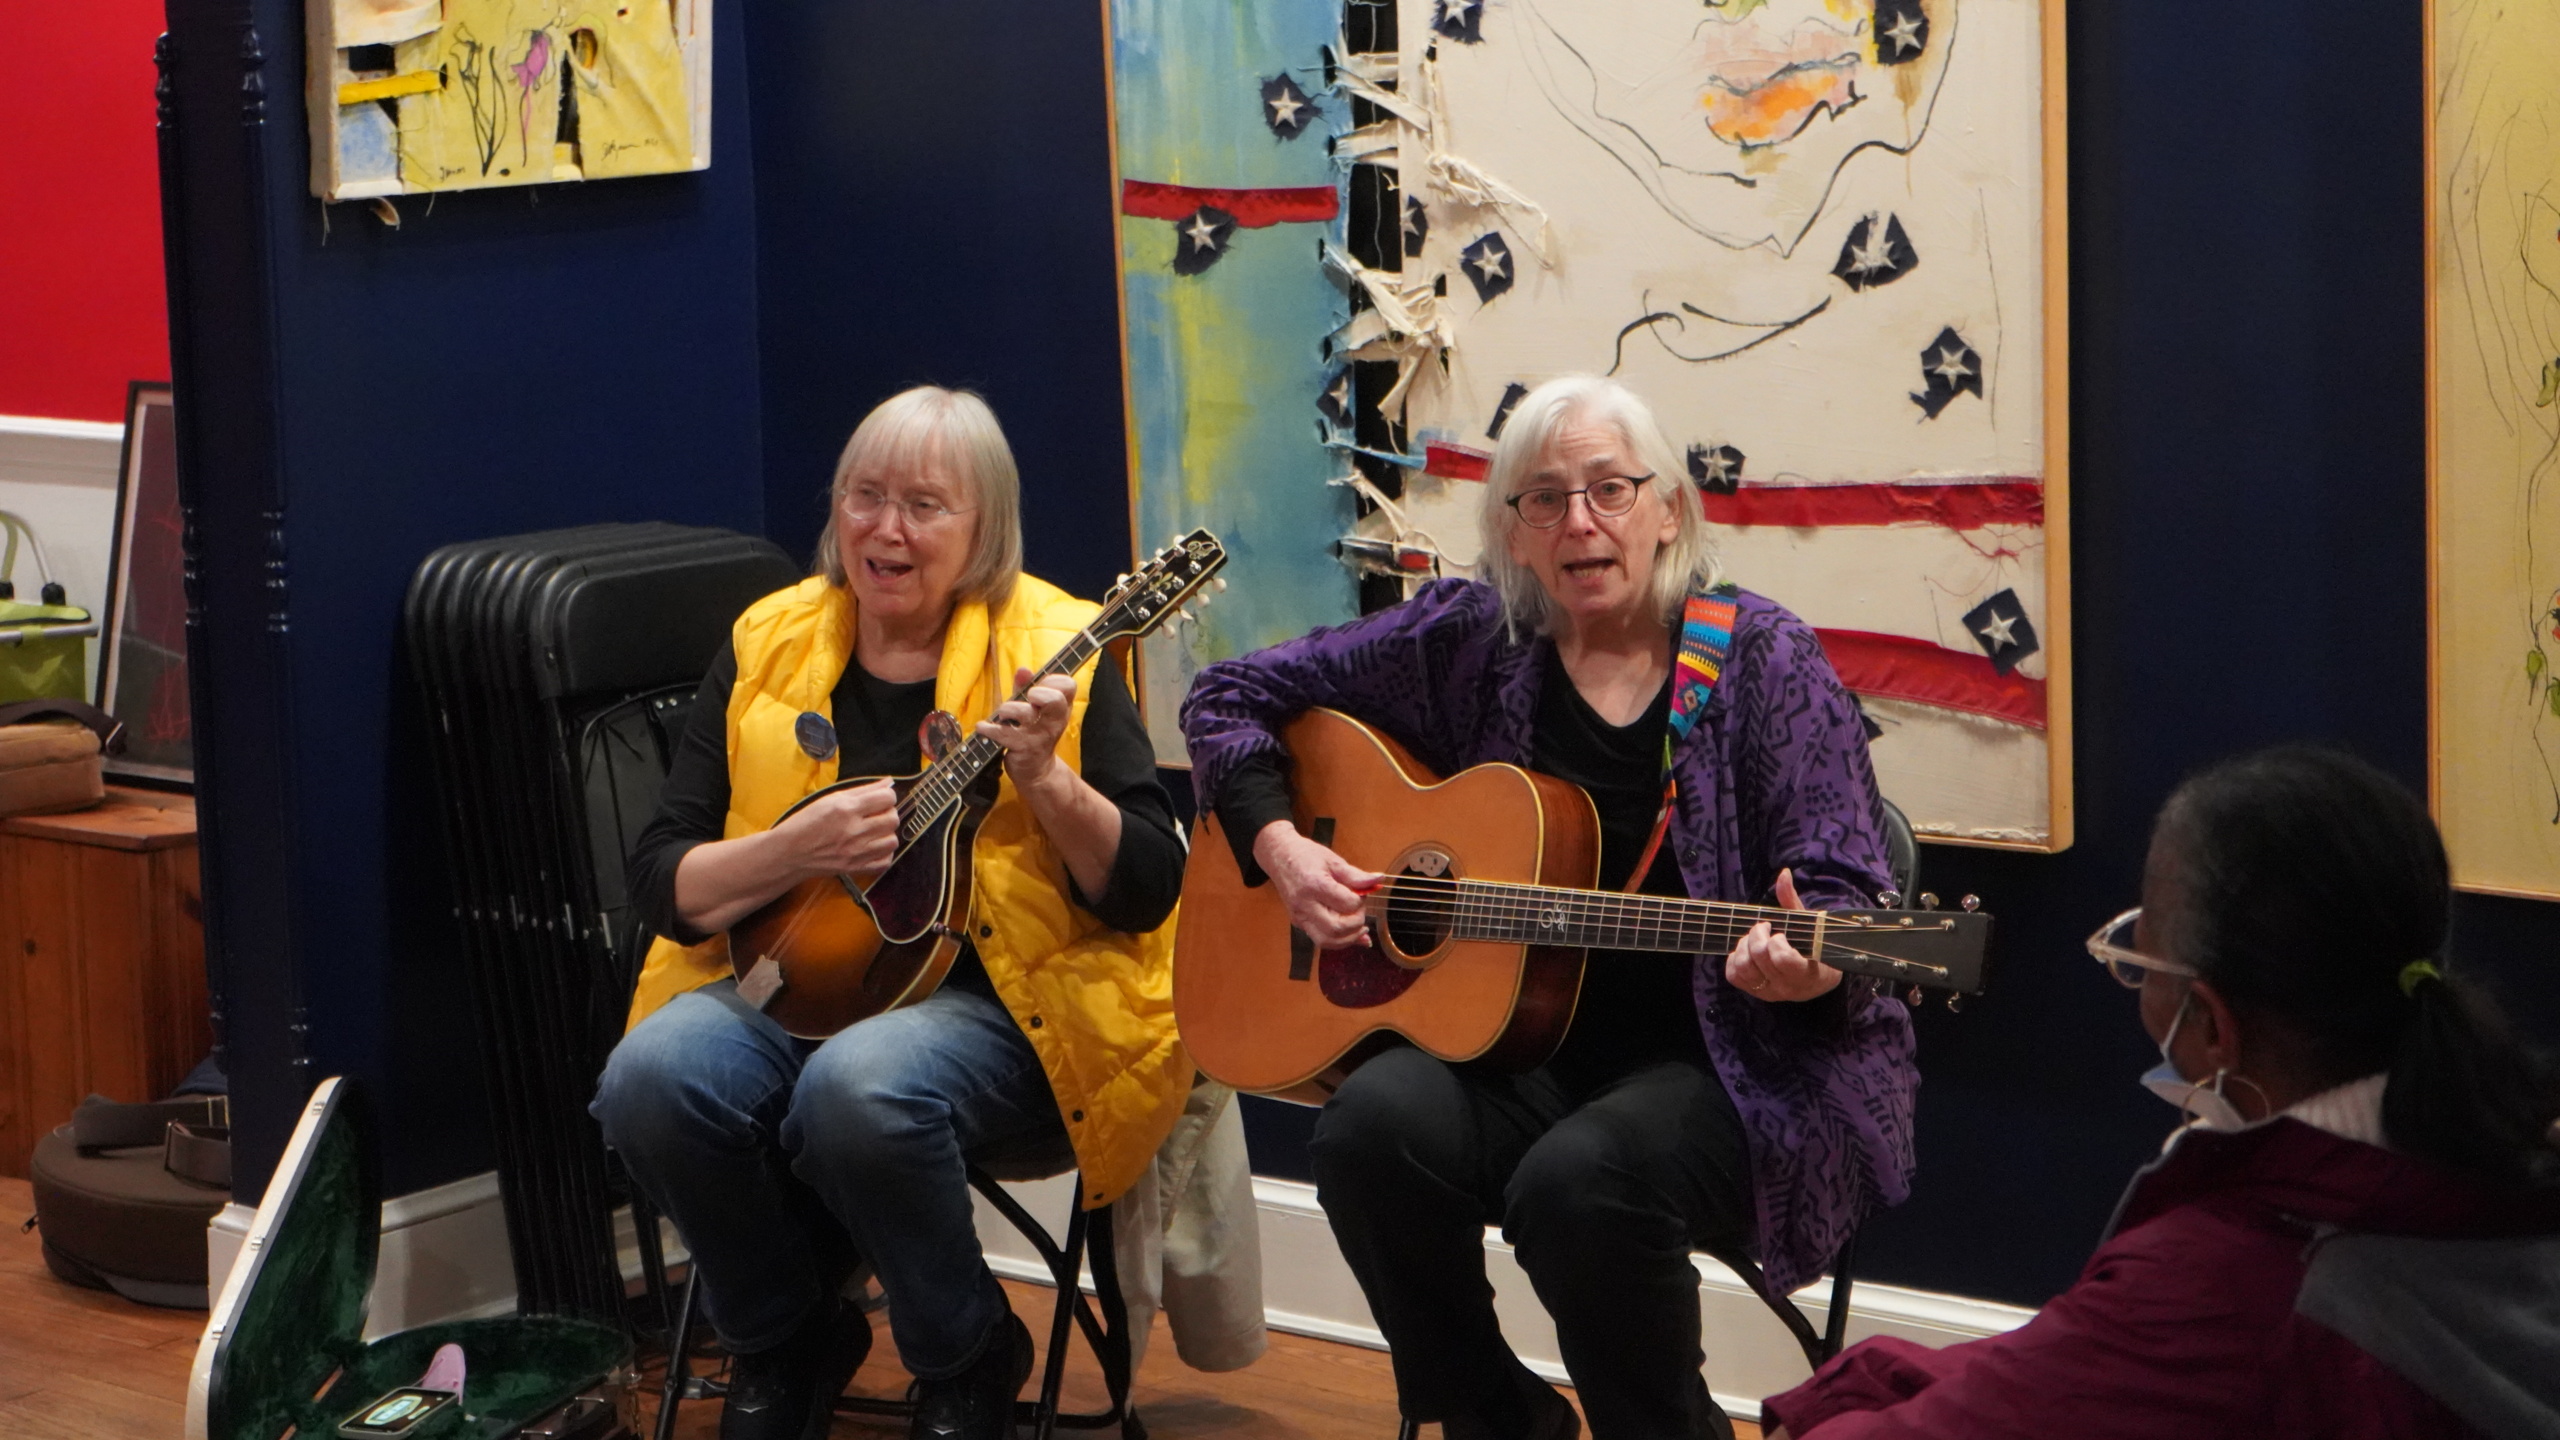 Cathy Fink and Marcy Marxer, Day With(out) Art Performance 12/1/22